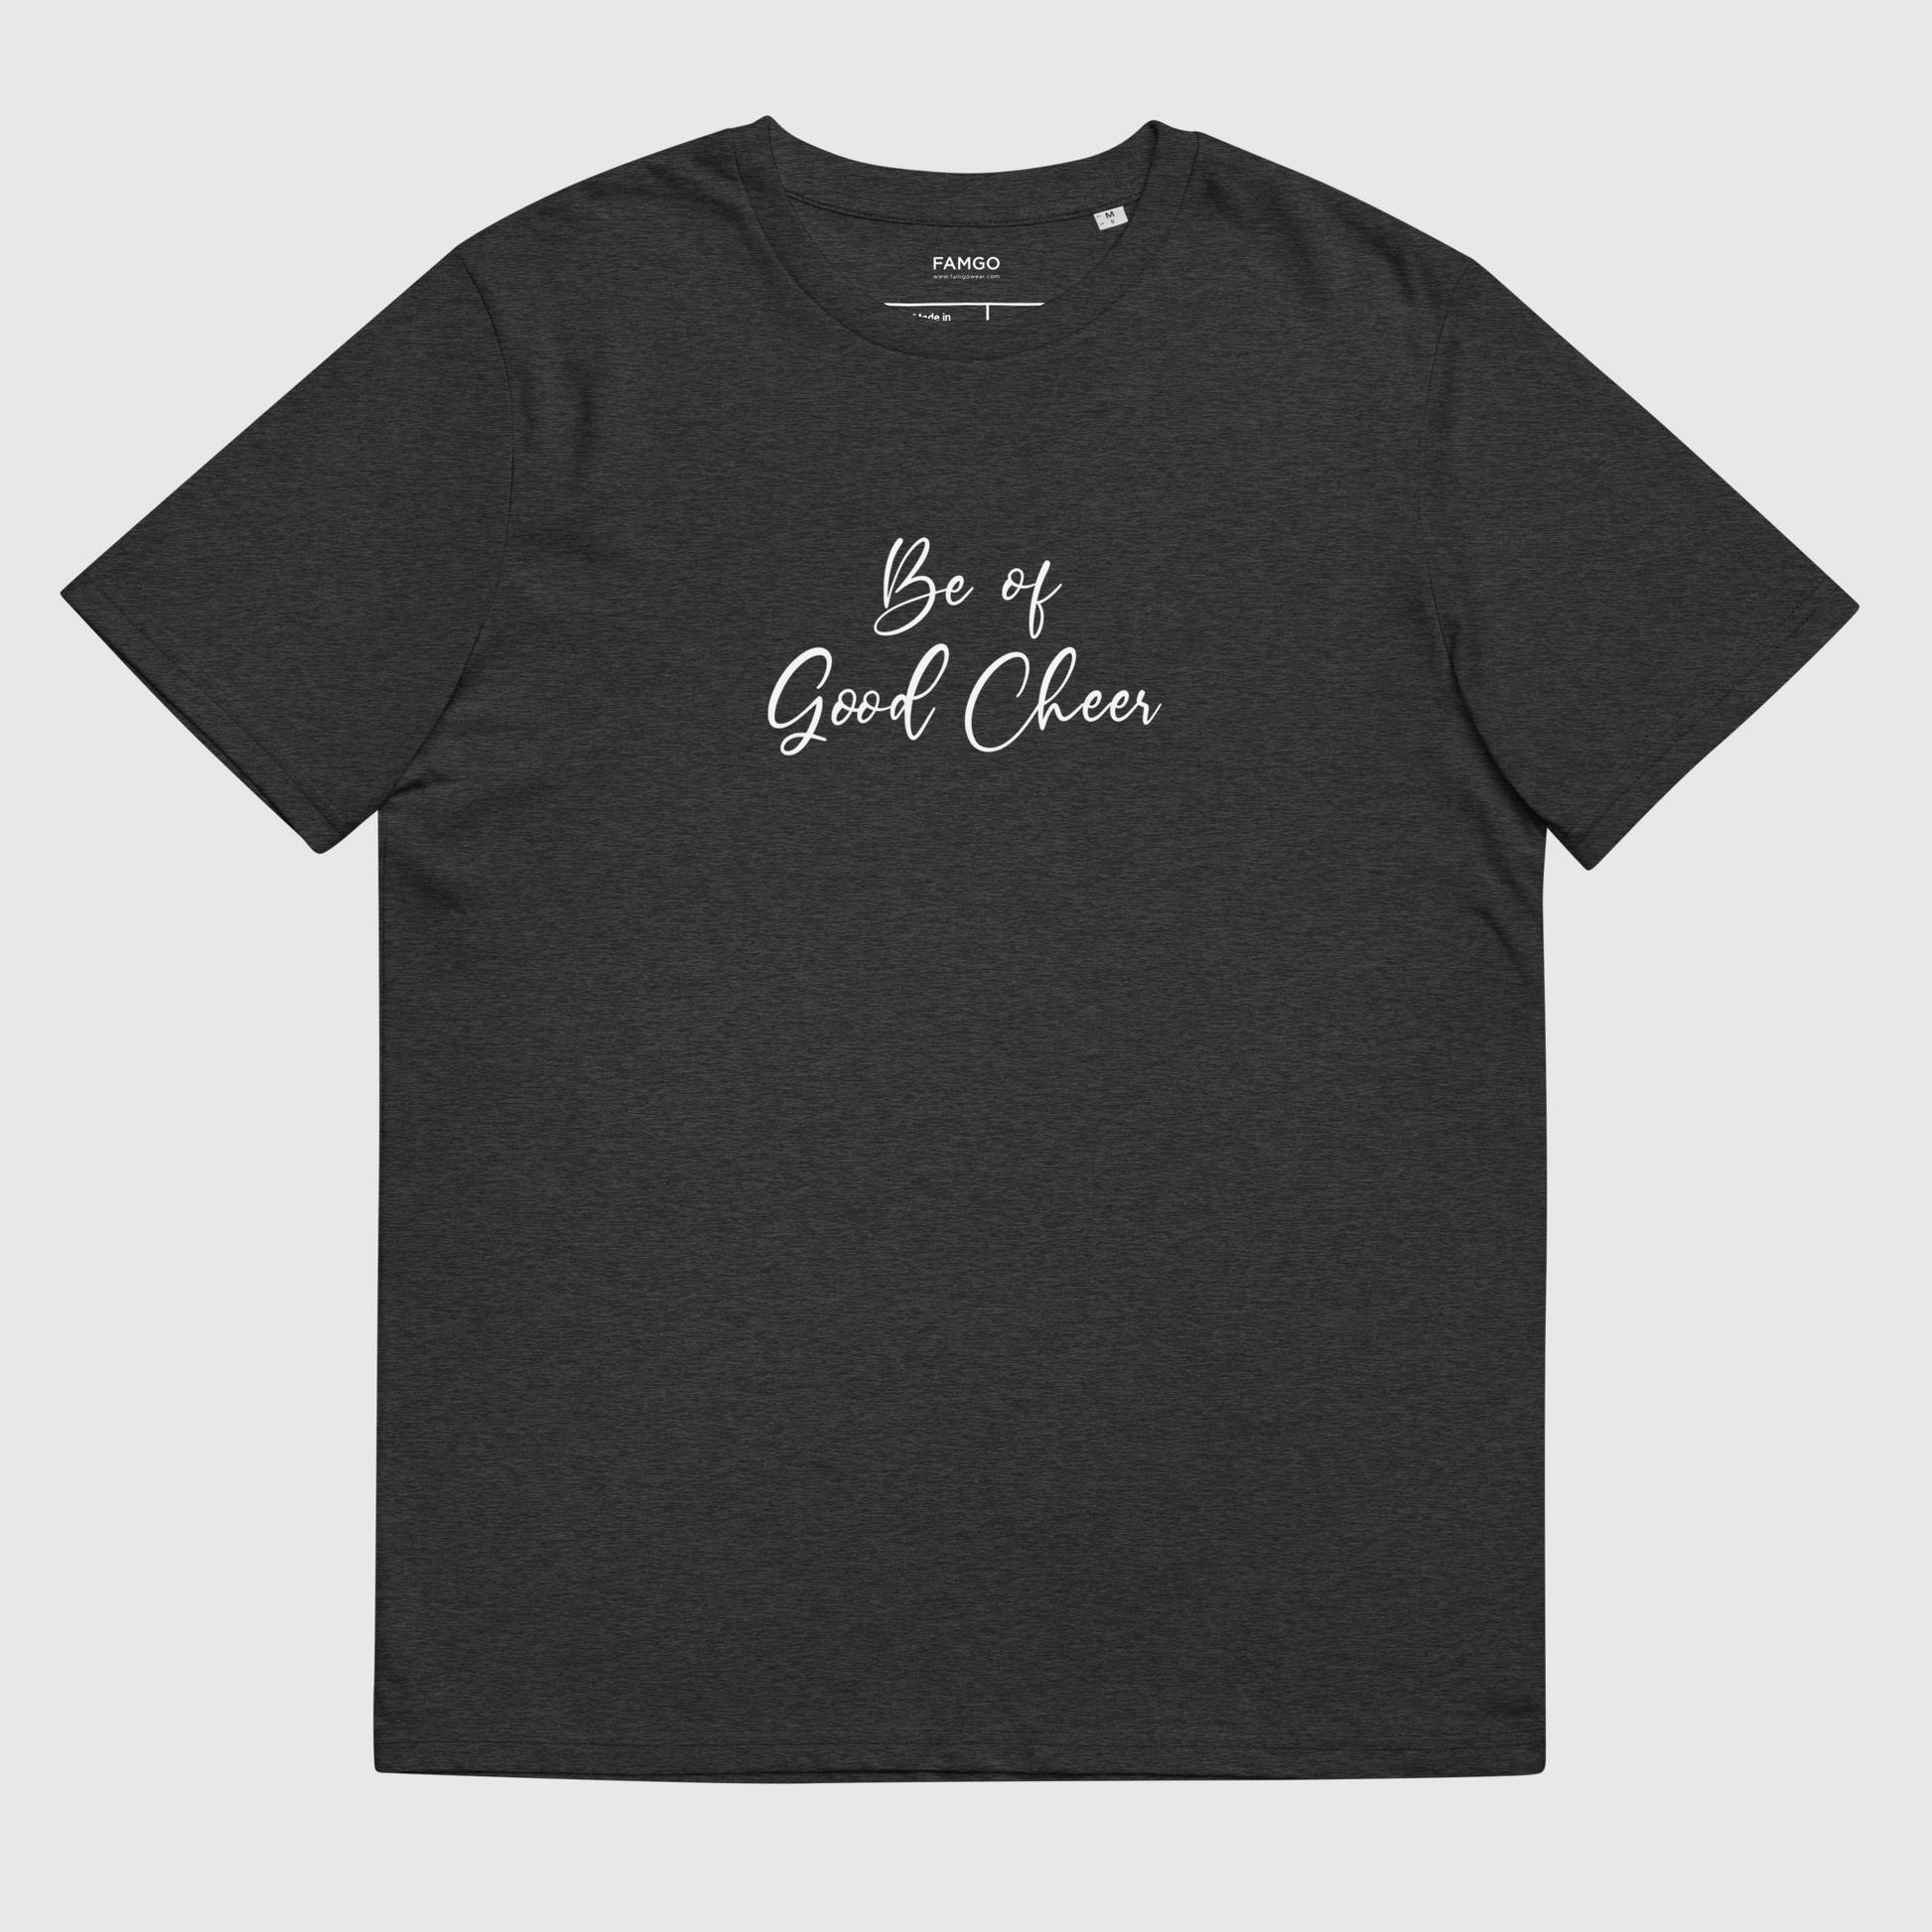 Men's dark heather gray organic cotton t-shirt that features the positive quote, "Be of Good Cheer."